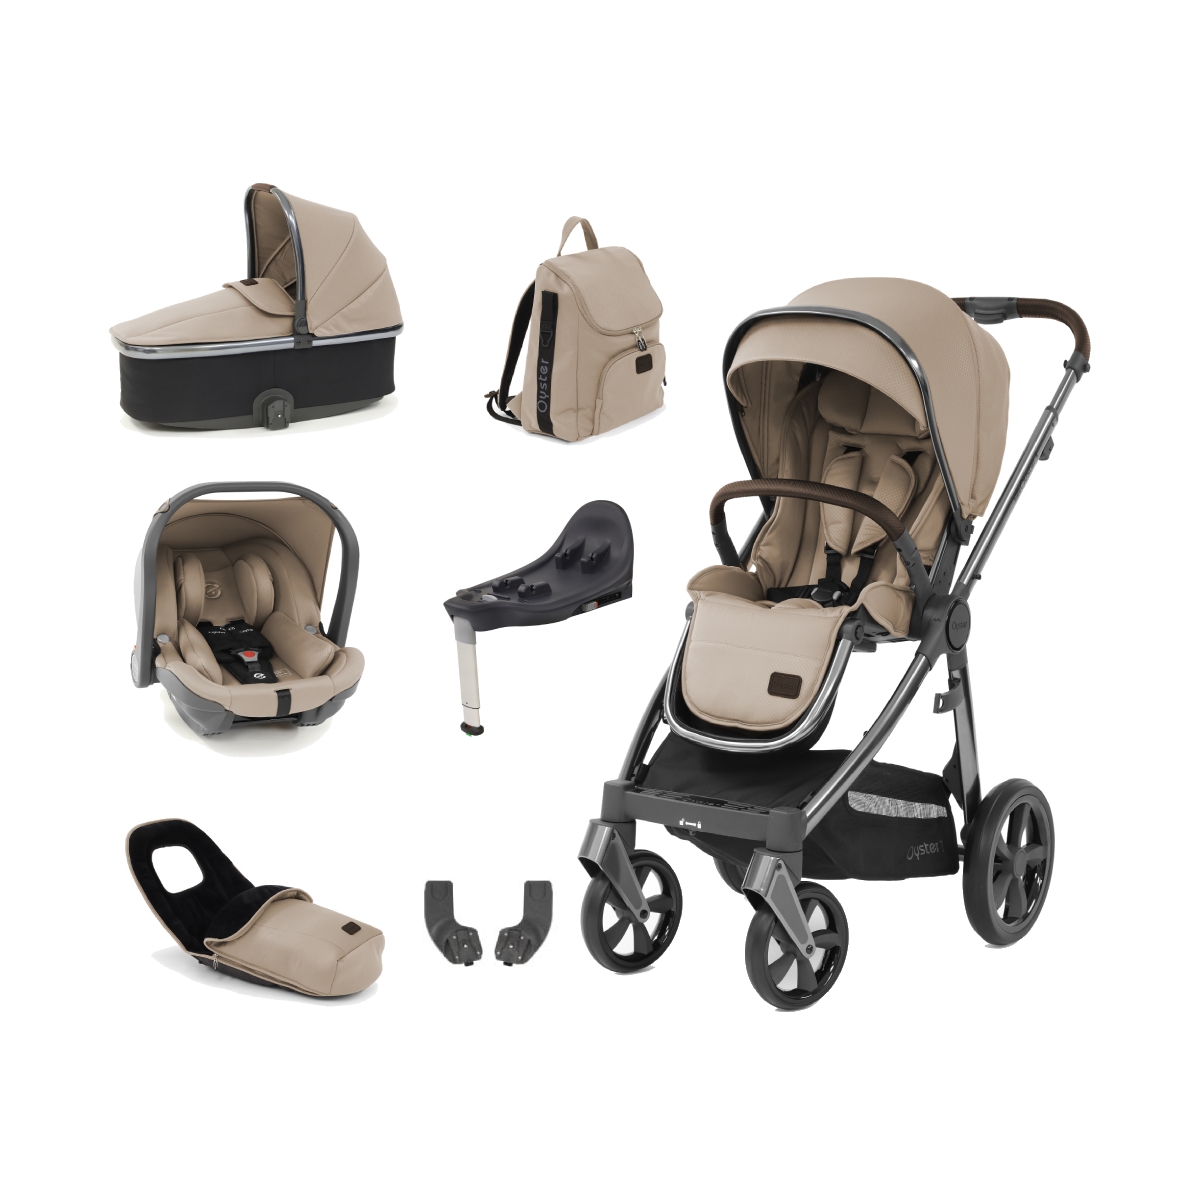 BabyStyle Oyster 3 Gun Metal Chassis Edition 7 Piece Luxury Travel System